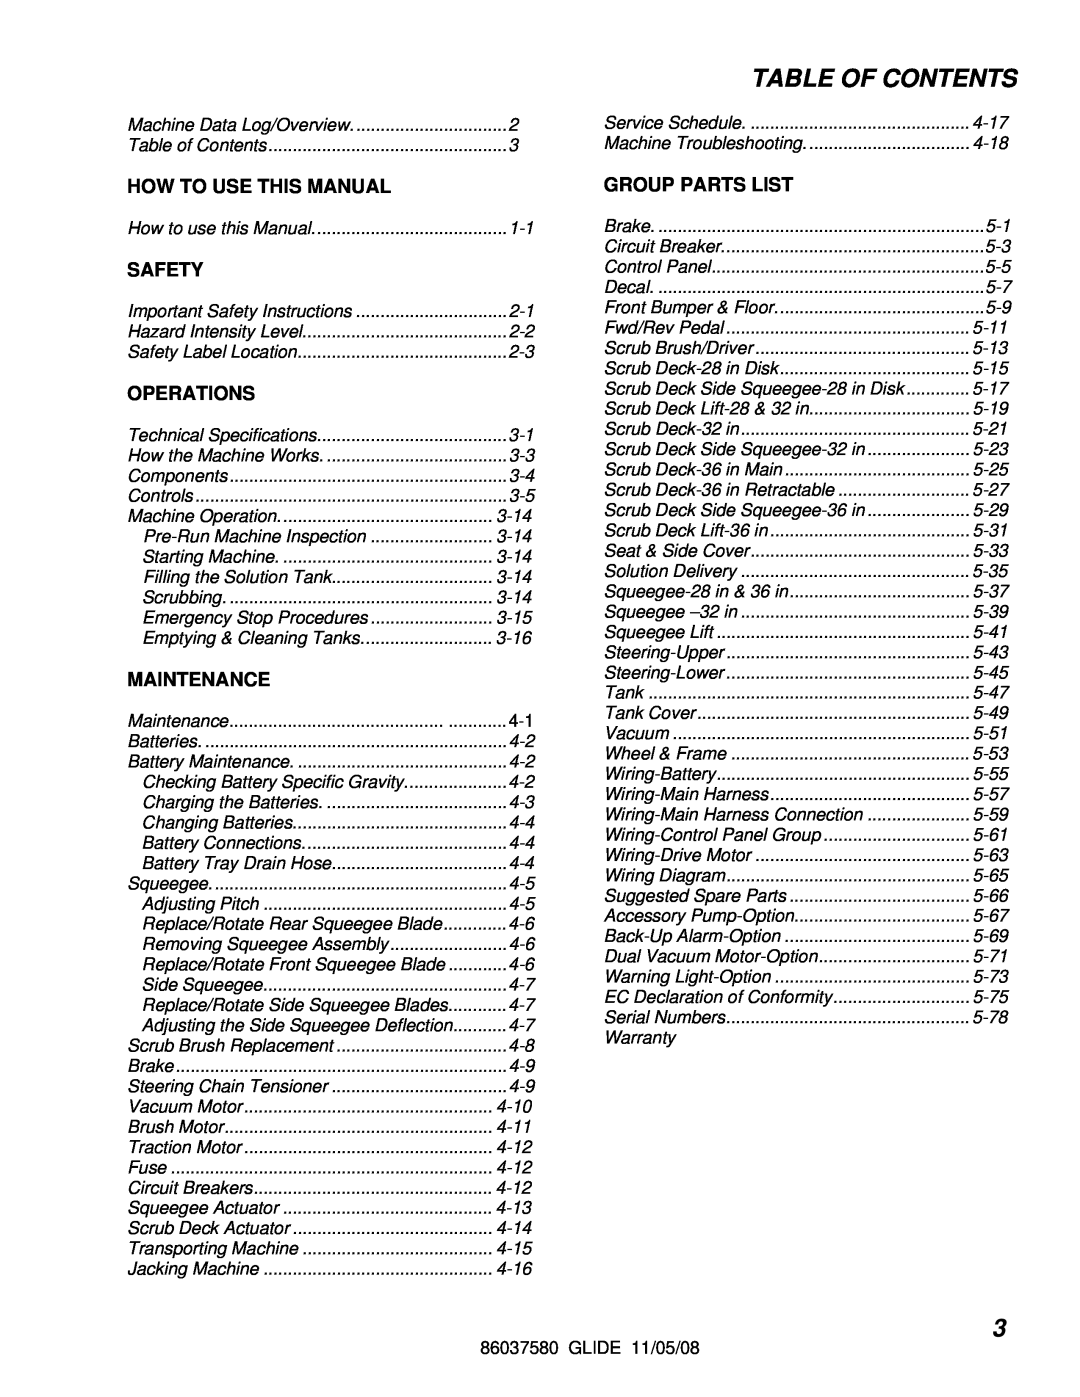 Windsor 10052450, SG32, SG36 Table Of Contents, How To Use This Manual, Safety, Operations, Maintenance, Group Parts List 